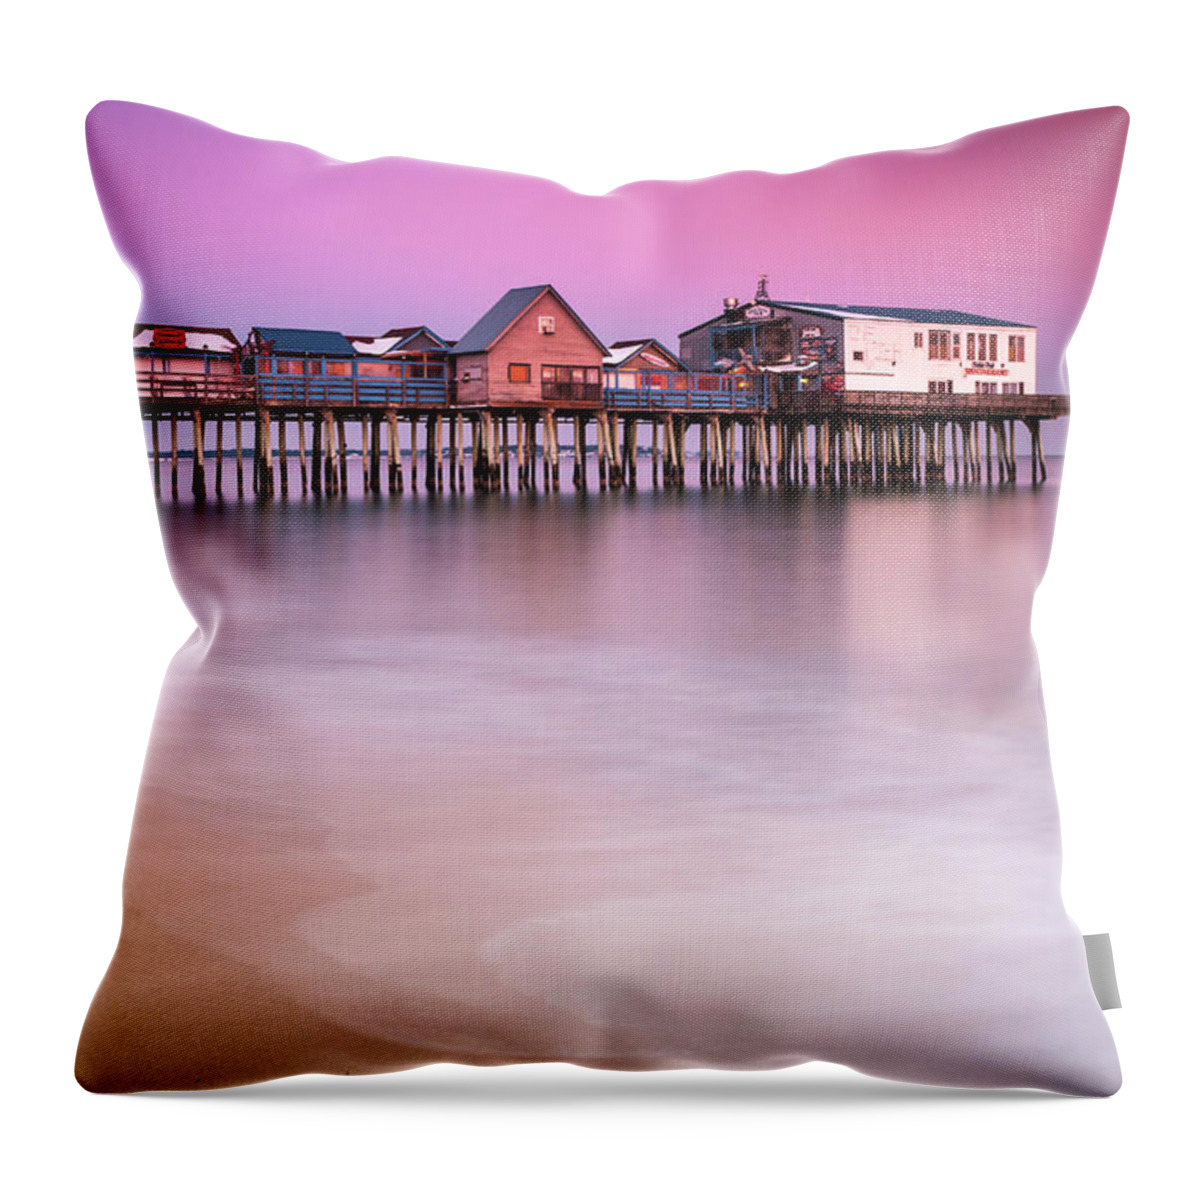 Maine Throw Pillow featuring the photograph Maine Old Orchard Beach Pier Sunset by Ranjay Mitra